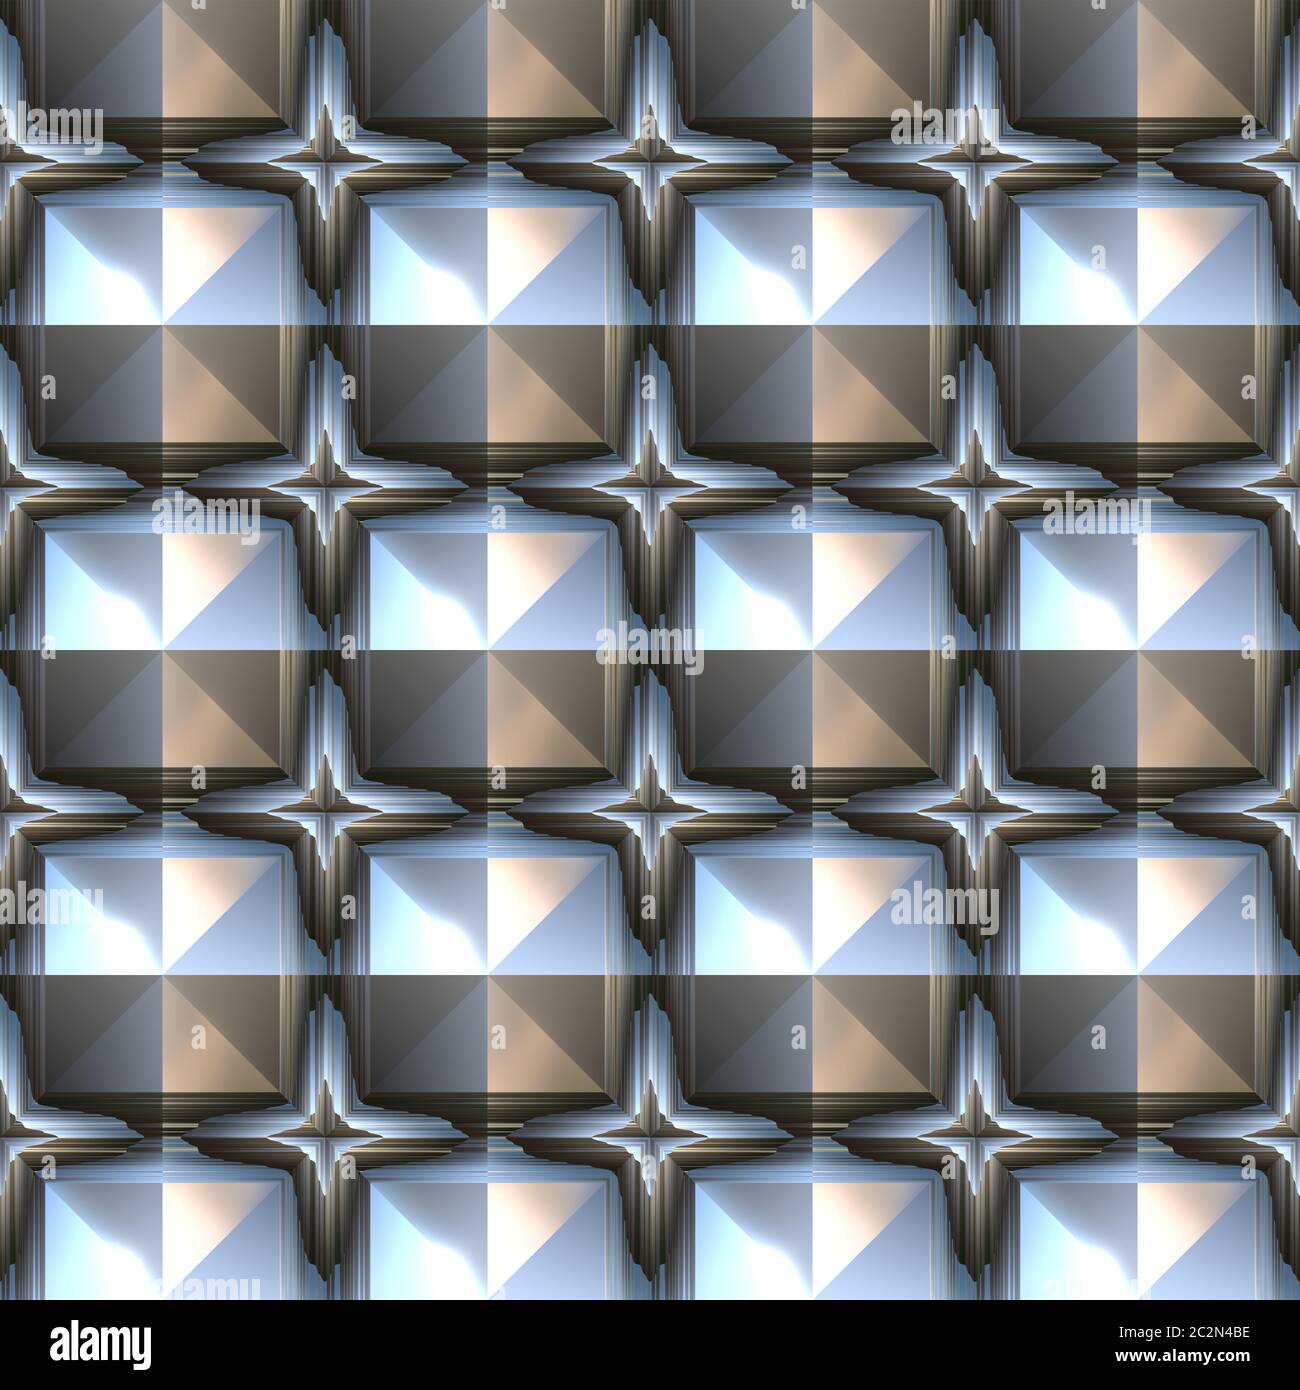 https://c8.alamy.com/comp/2C2N4BE/seamless-repeating-pattern-tile-of-interessting-embossed-texture-with-a-glossy-metal-effect-in-fashionable-silver-2C2N4BE.jpg